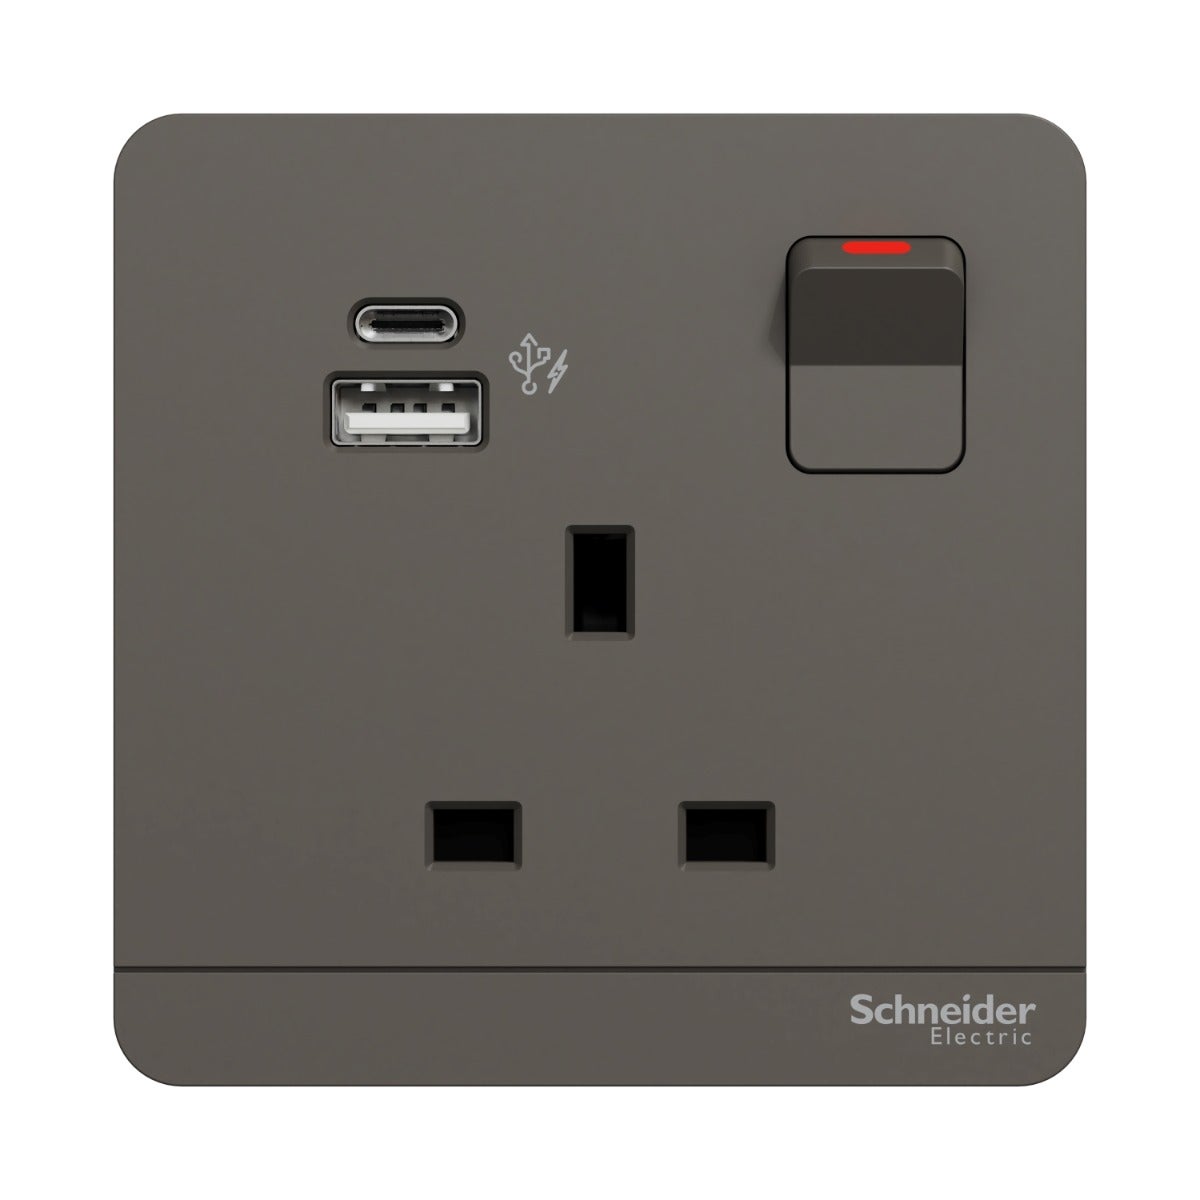 AvatarOn 13A 1 Gang Double Pole Switched Socket with 2 Gang USB Charger Socket Type A+C, Dark Grey